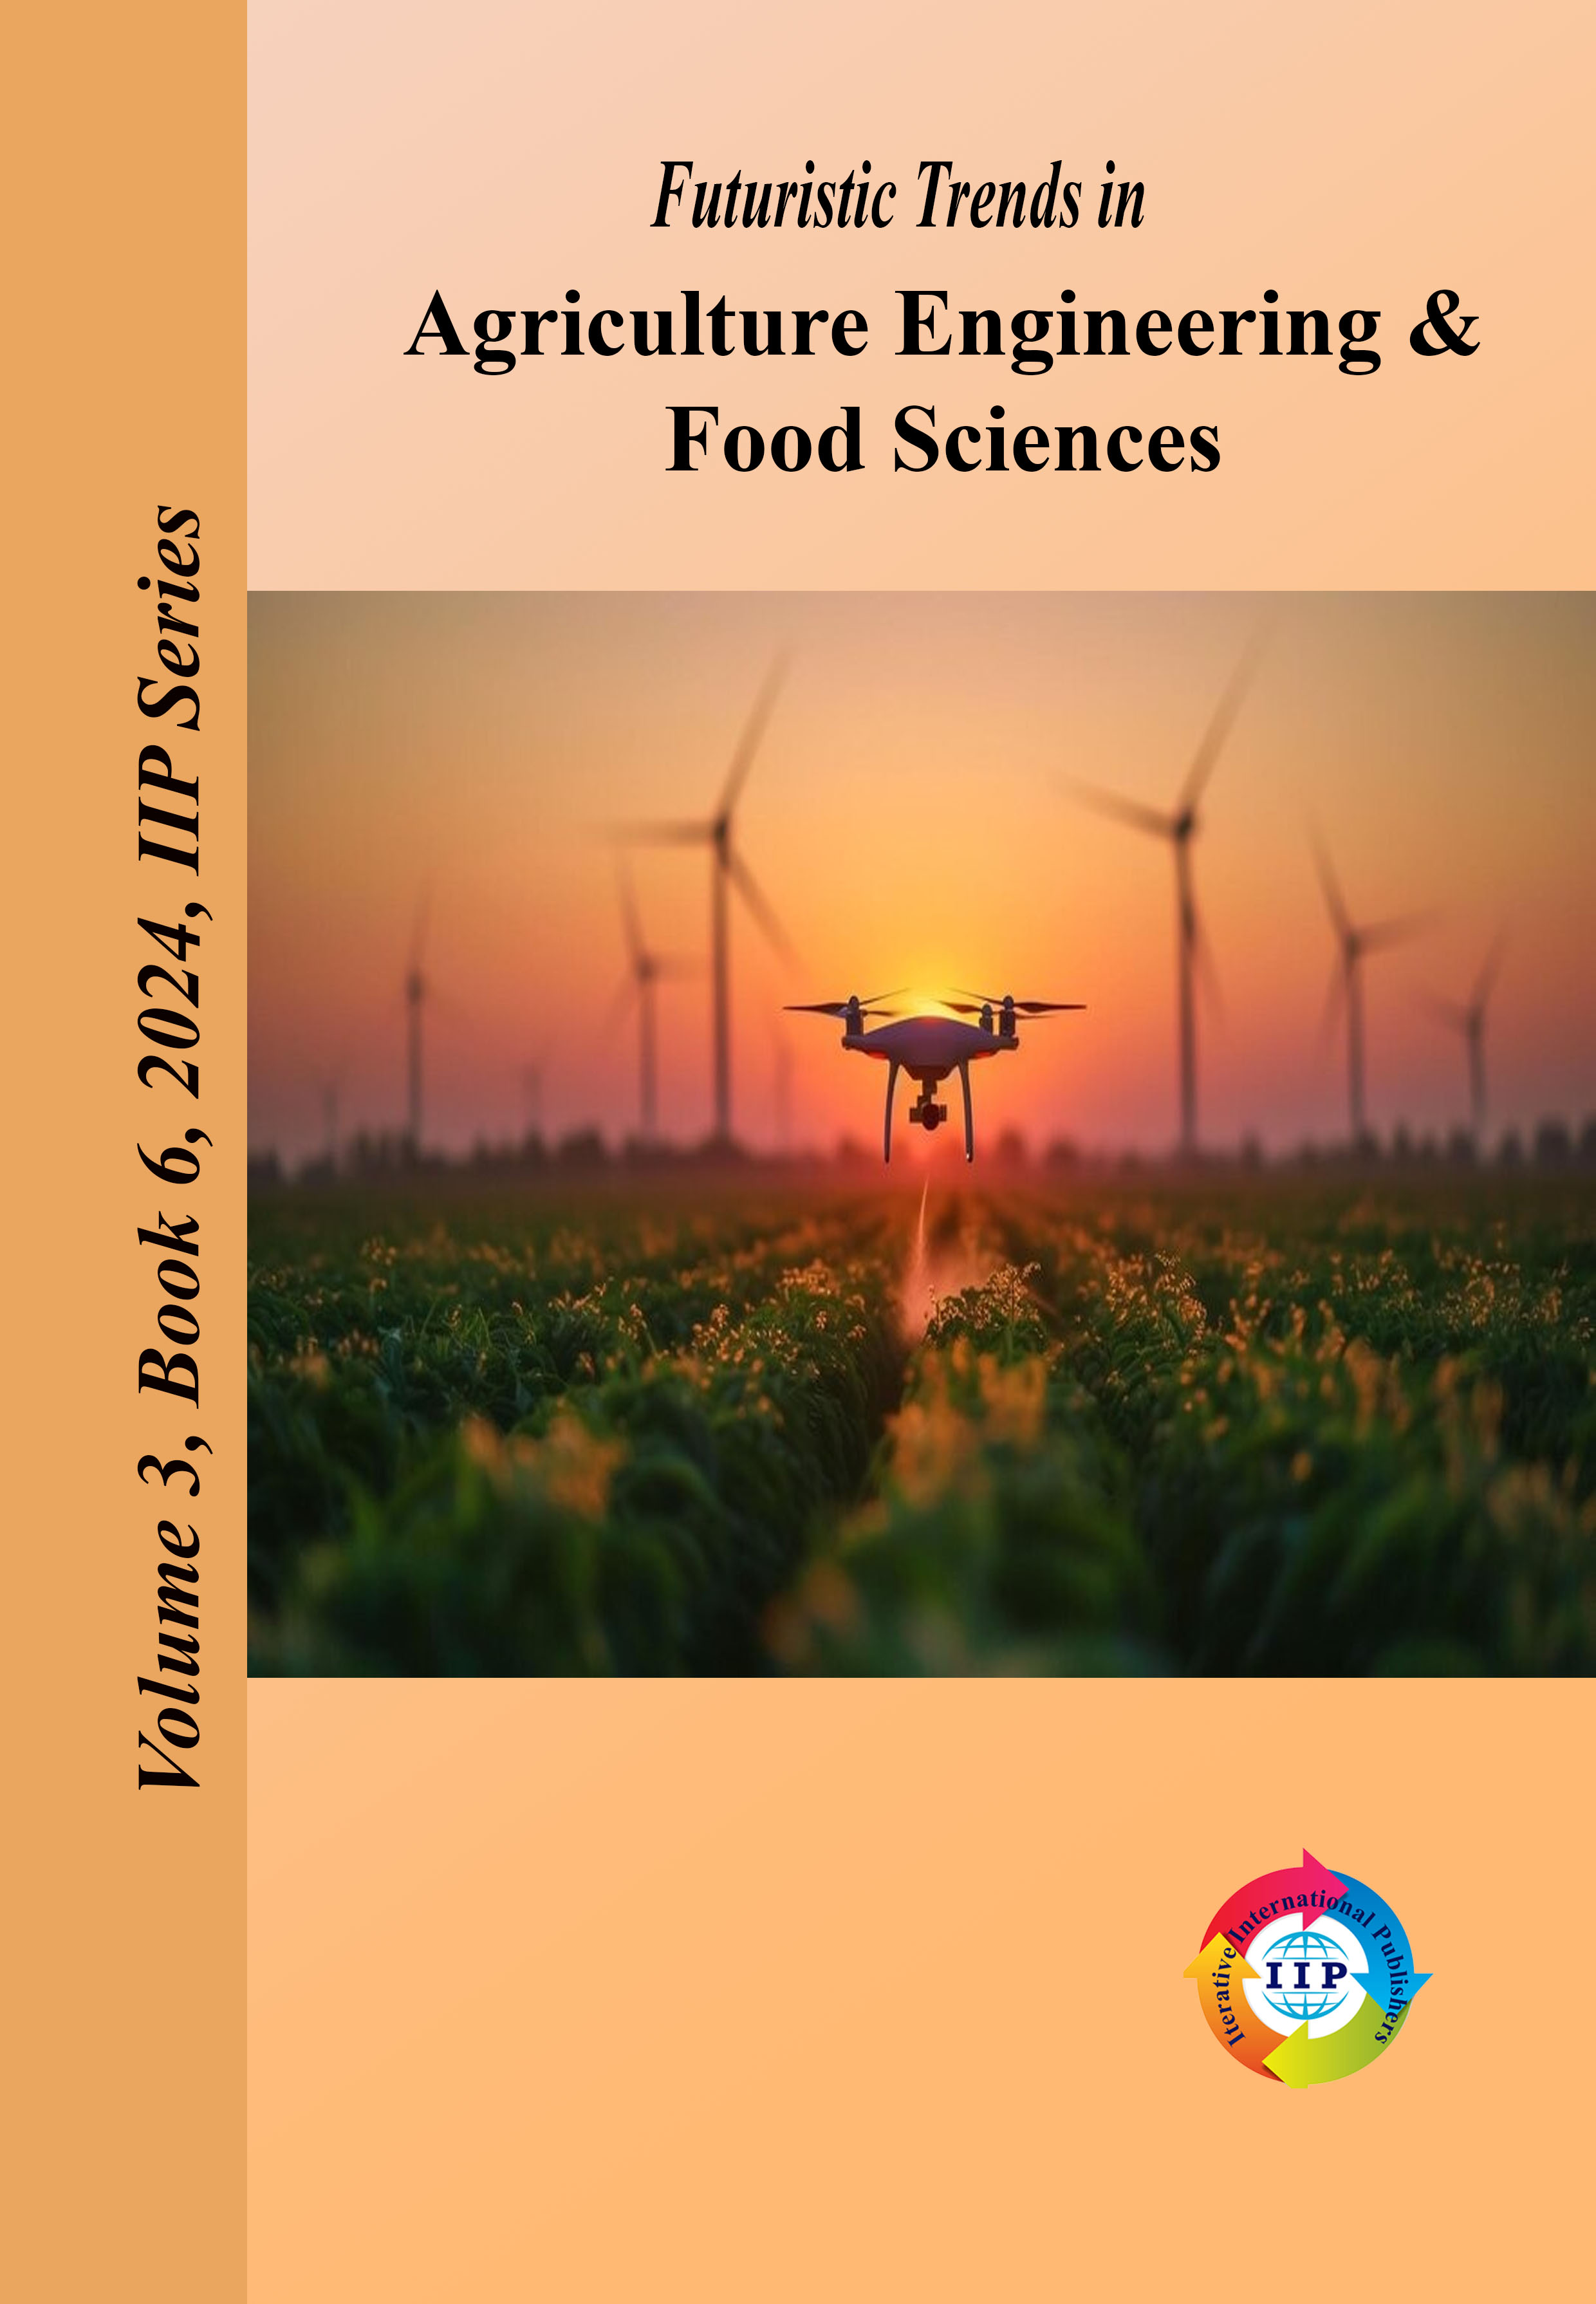 Futuristic Trends in Agriculture Engineering & Food Sciences Volume 3 Book 6